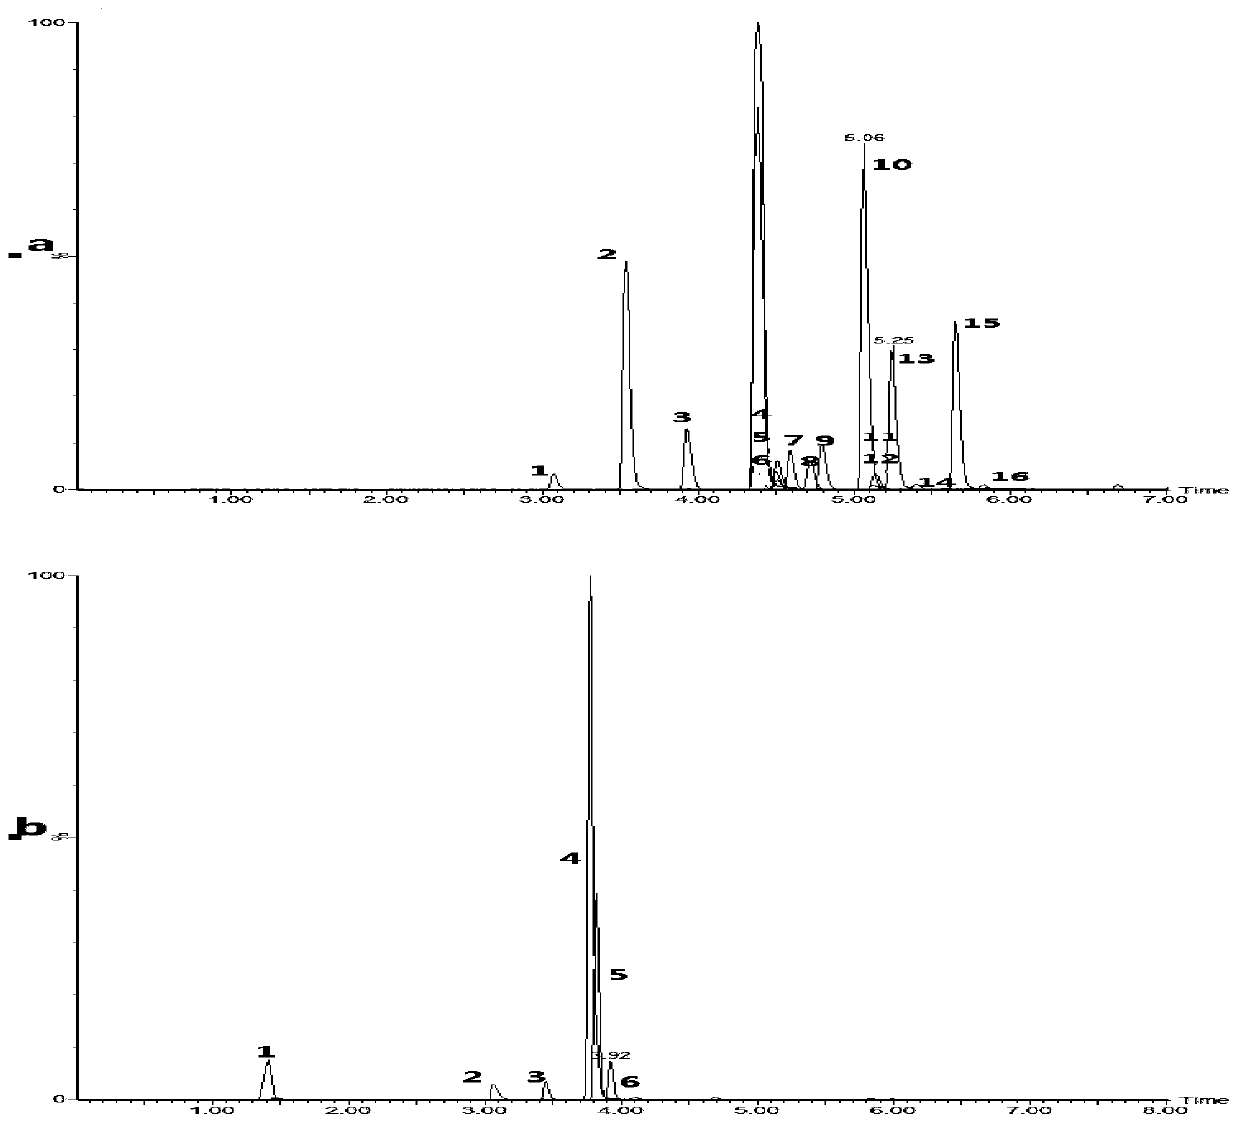 Method for determining 16 mycotoxins in tea leaves by ultra-high performance liquid chromatography-tandem mass spectrometry